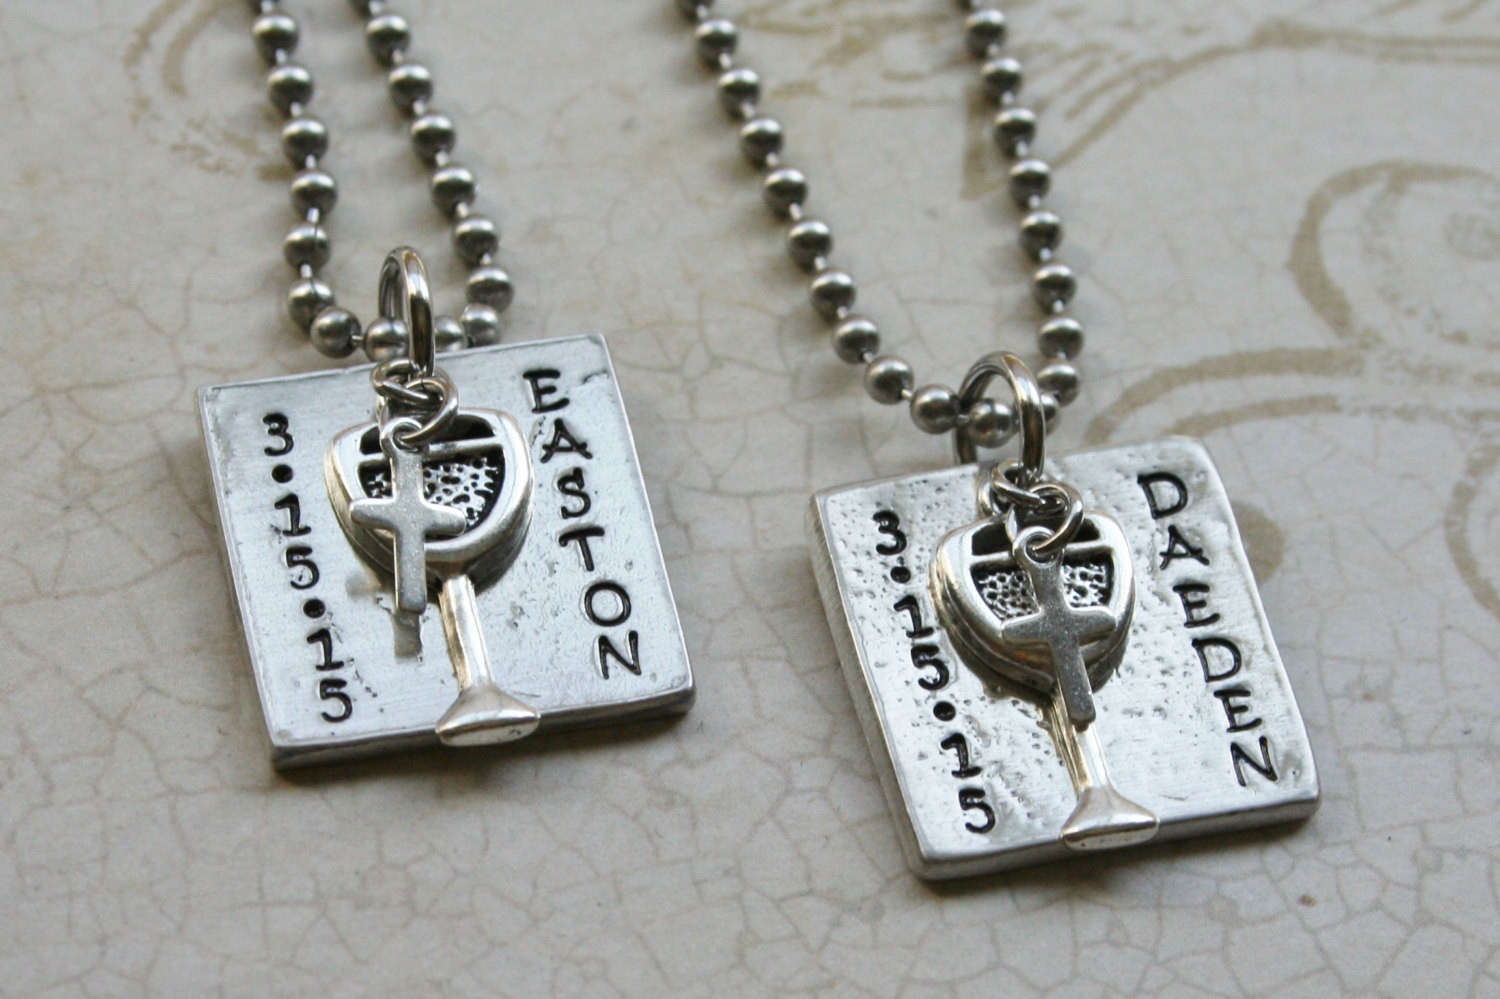 Boys Communion Gift Ideas
 First munion Necklace for Boys Gift First munion